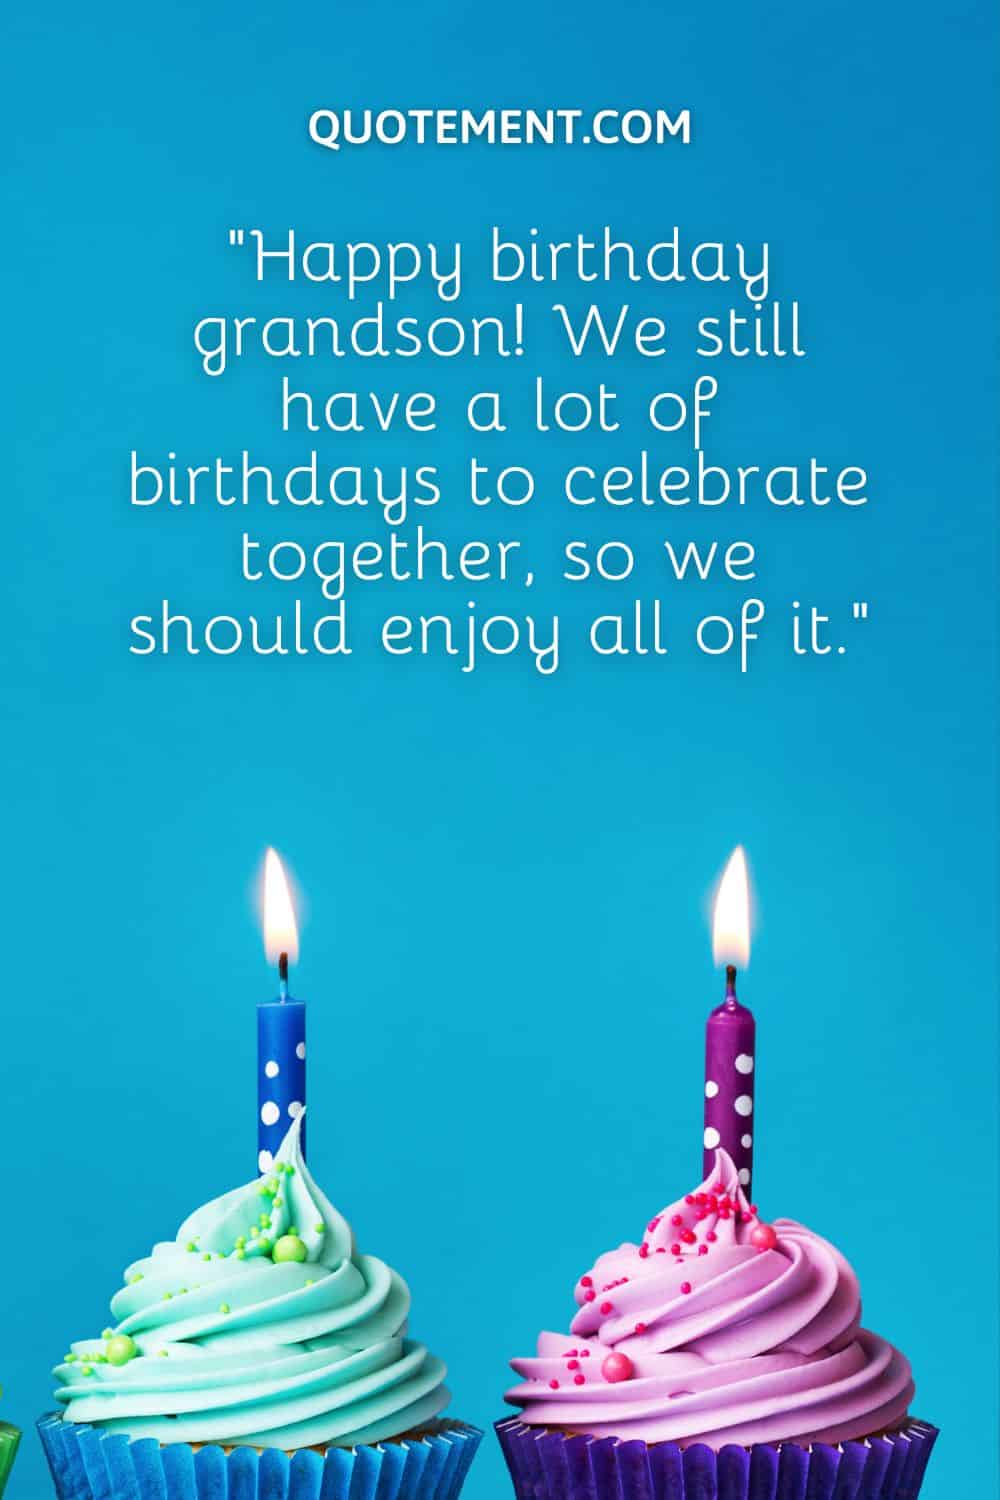 “Happy birthday grandson! We still have a lot of birthdays to celebrate together, so we should enjoy all of it.”